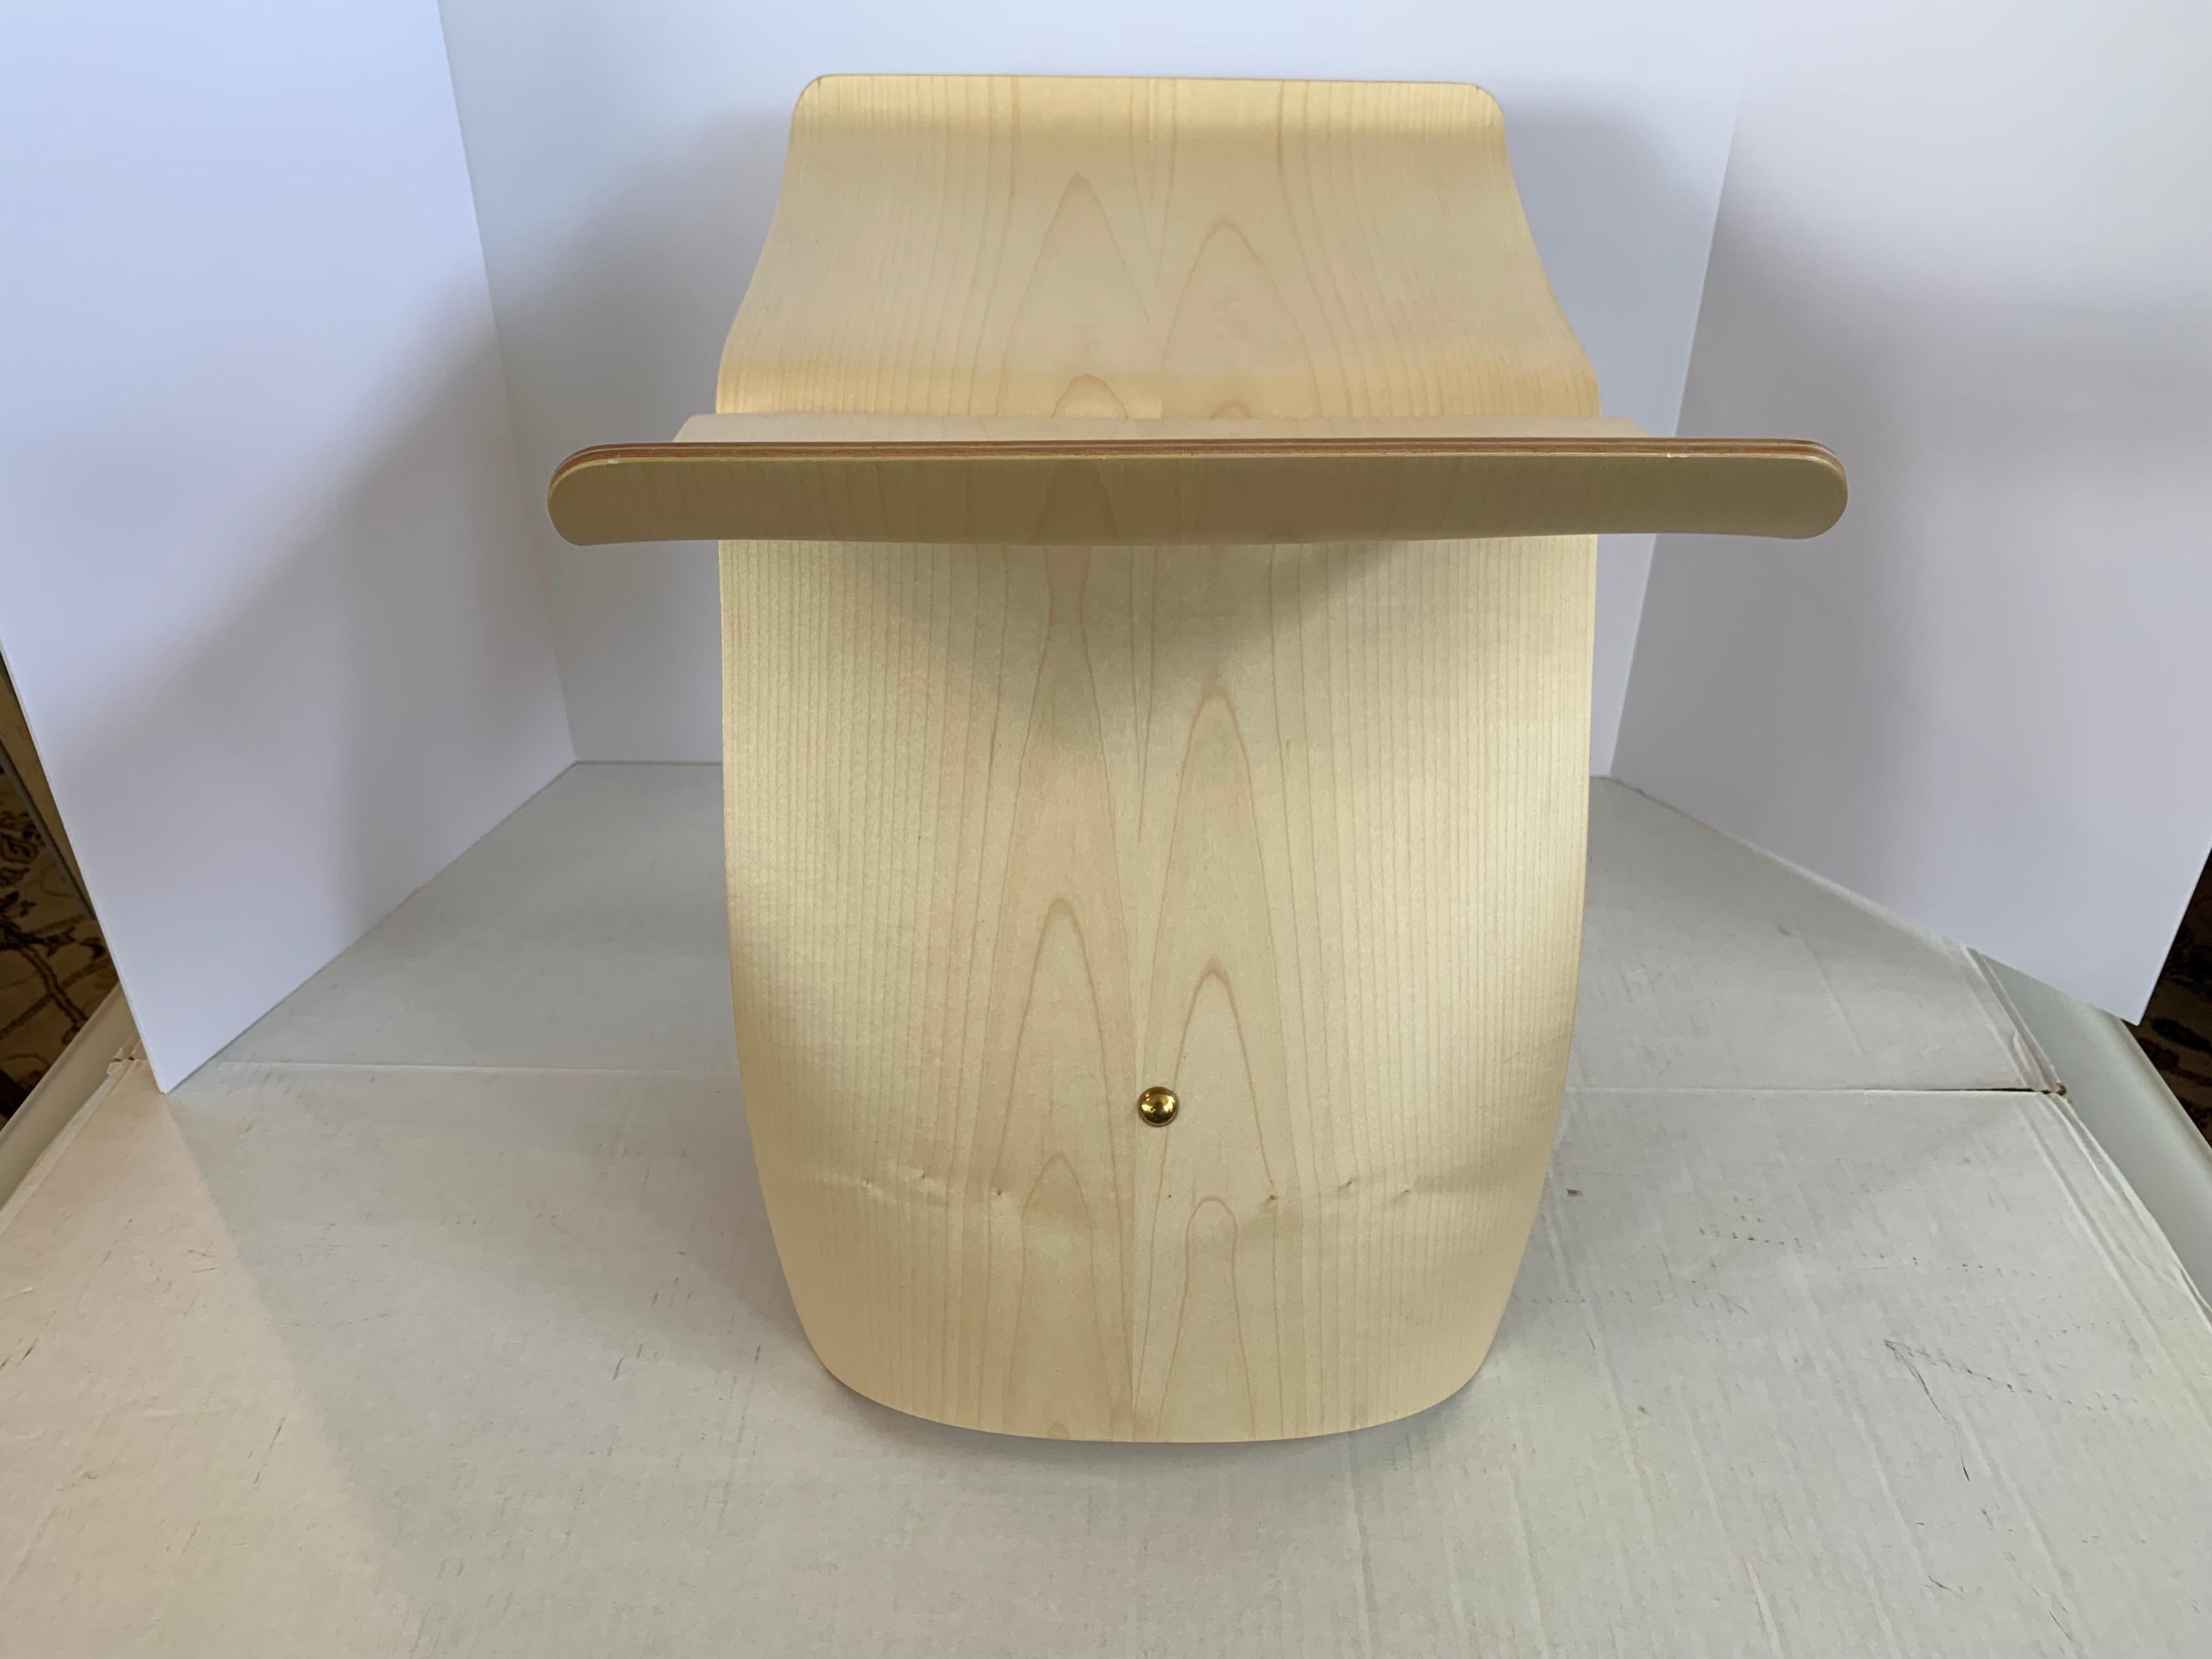 Vitra Signed Butterfly Stool in Maple Plywood and Brass by Sori Yanagi 2